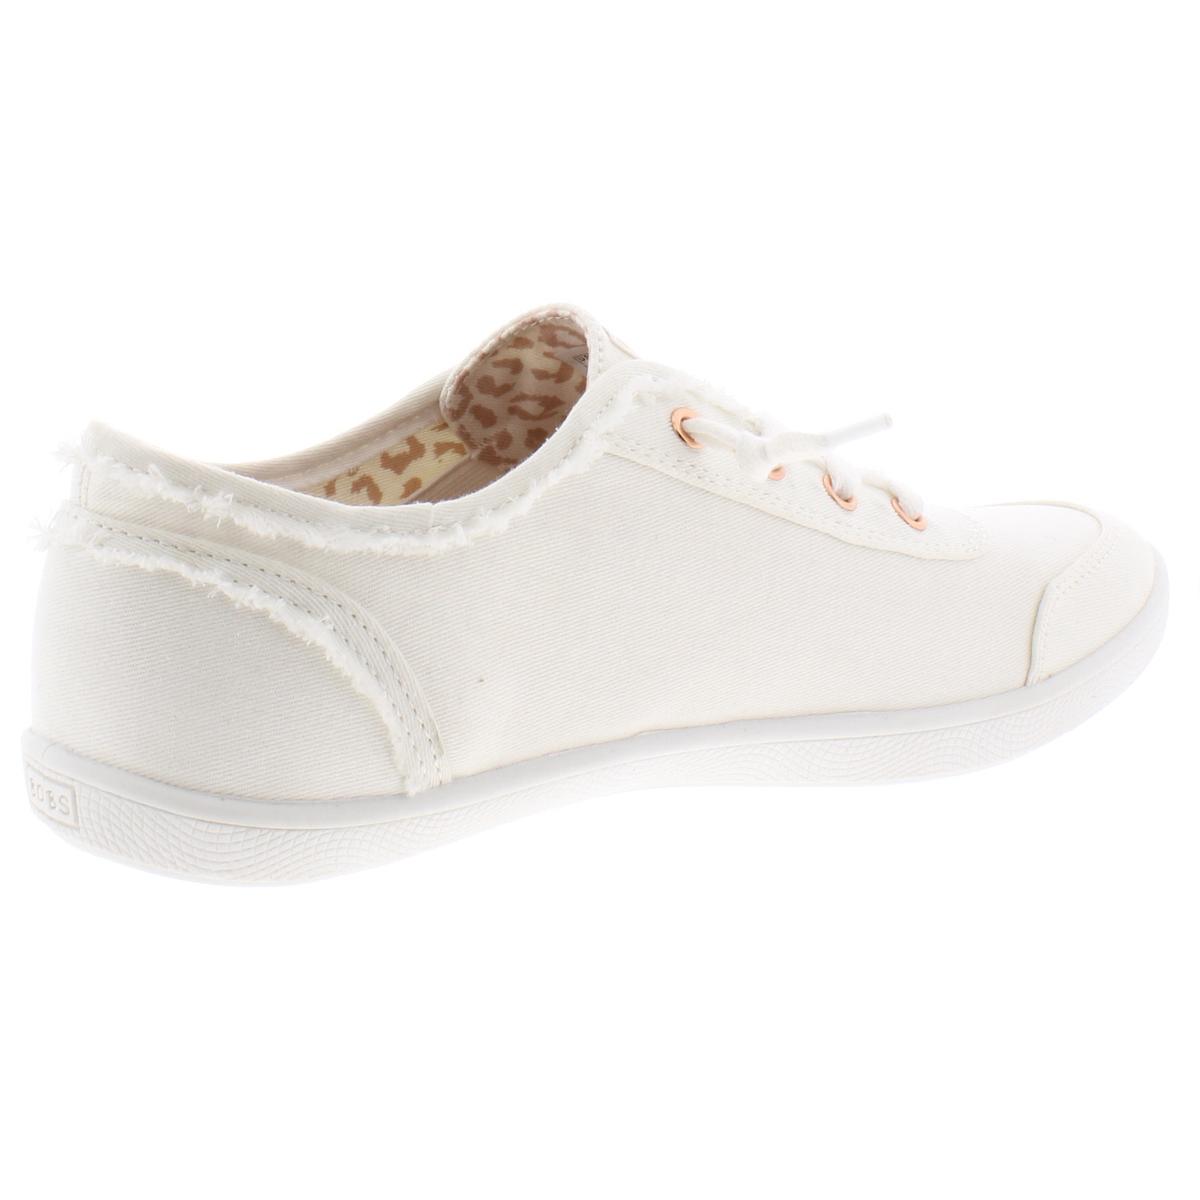 BOBS From Skechers Womens B Cute White Sneakers Shoes 7 Medium (B,M ...